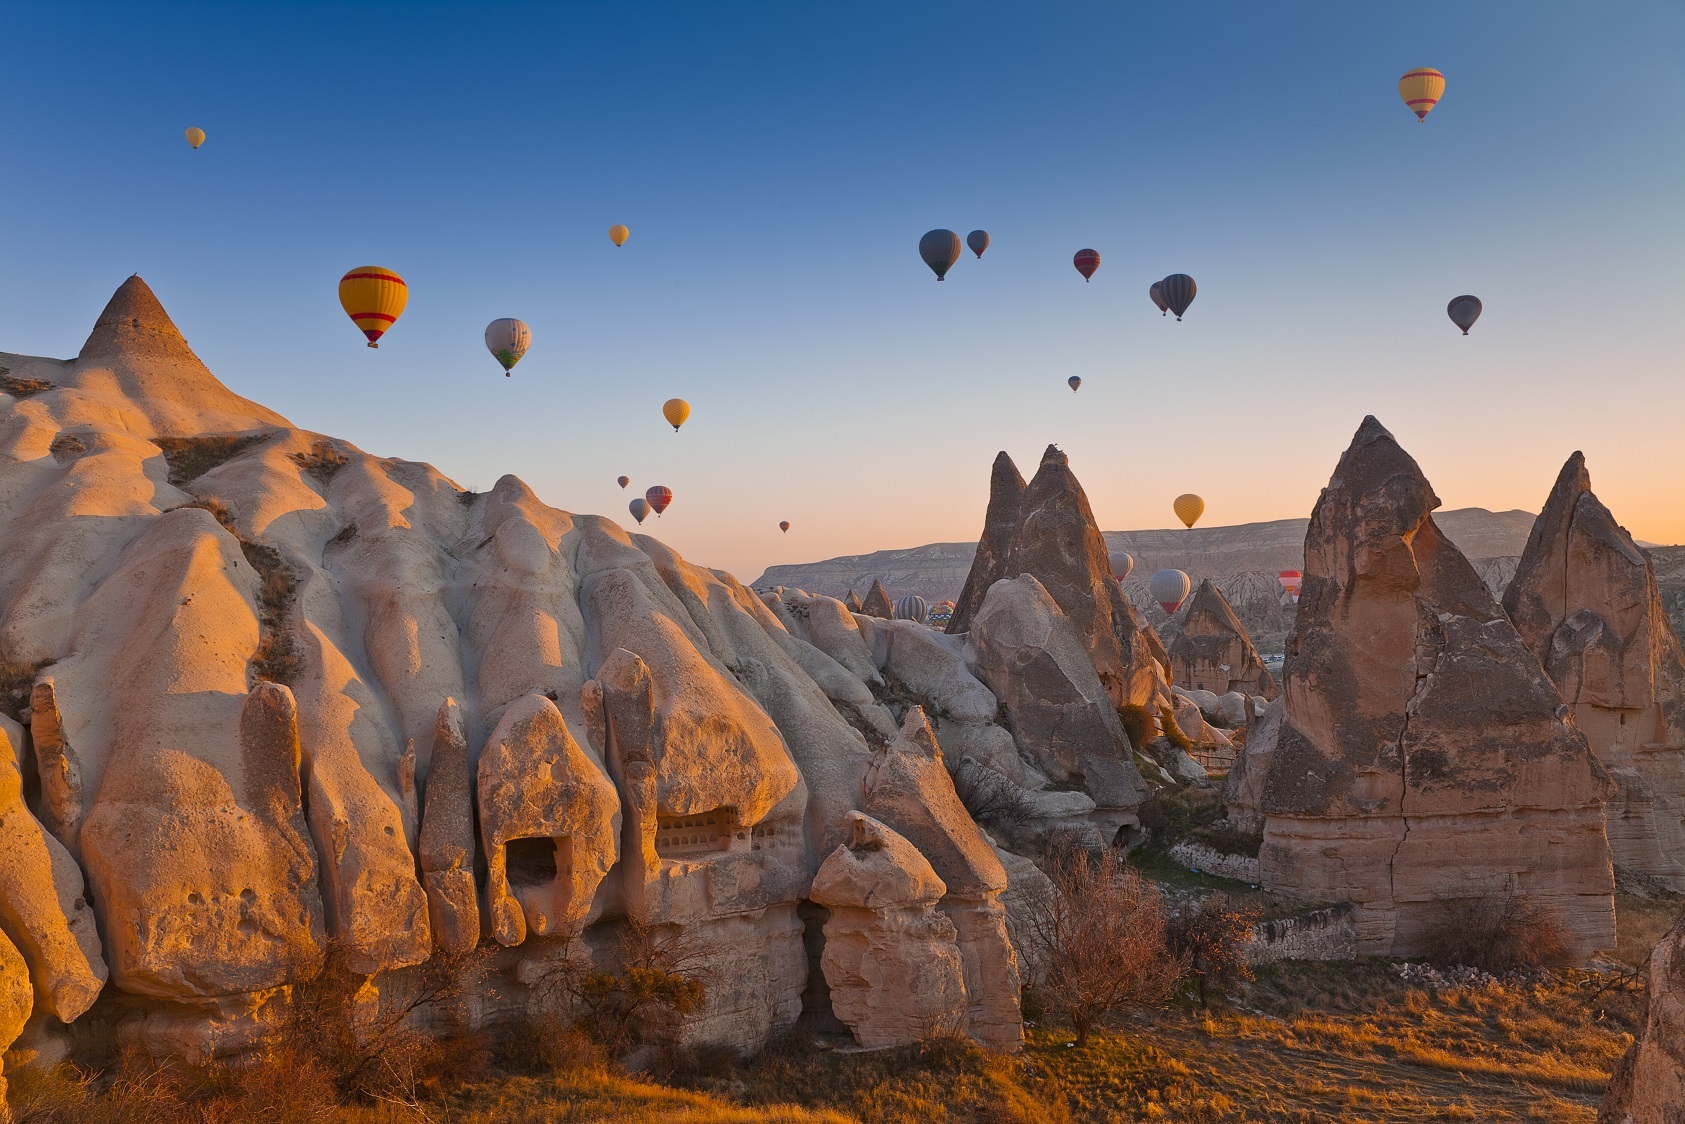 Natural Sites to Discover in the World - Cappadocia, Turkey